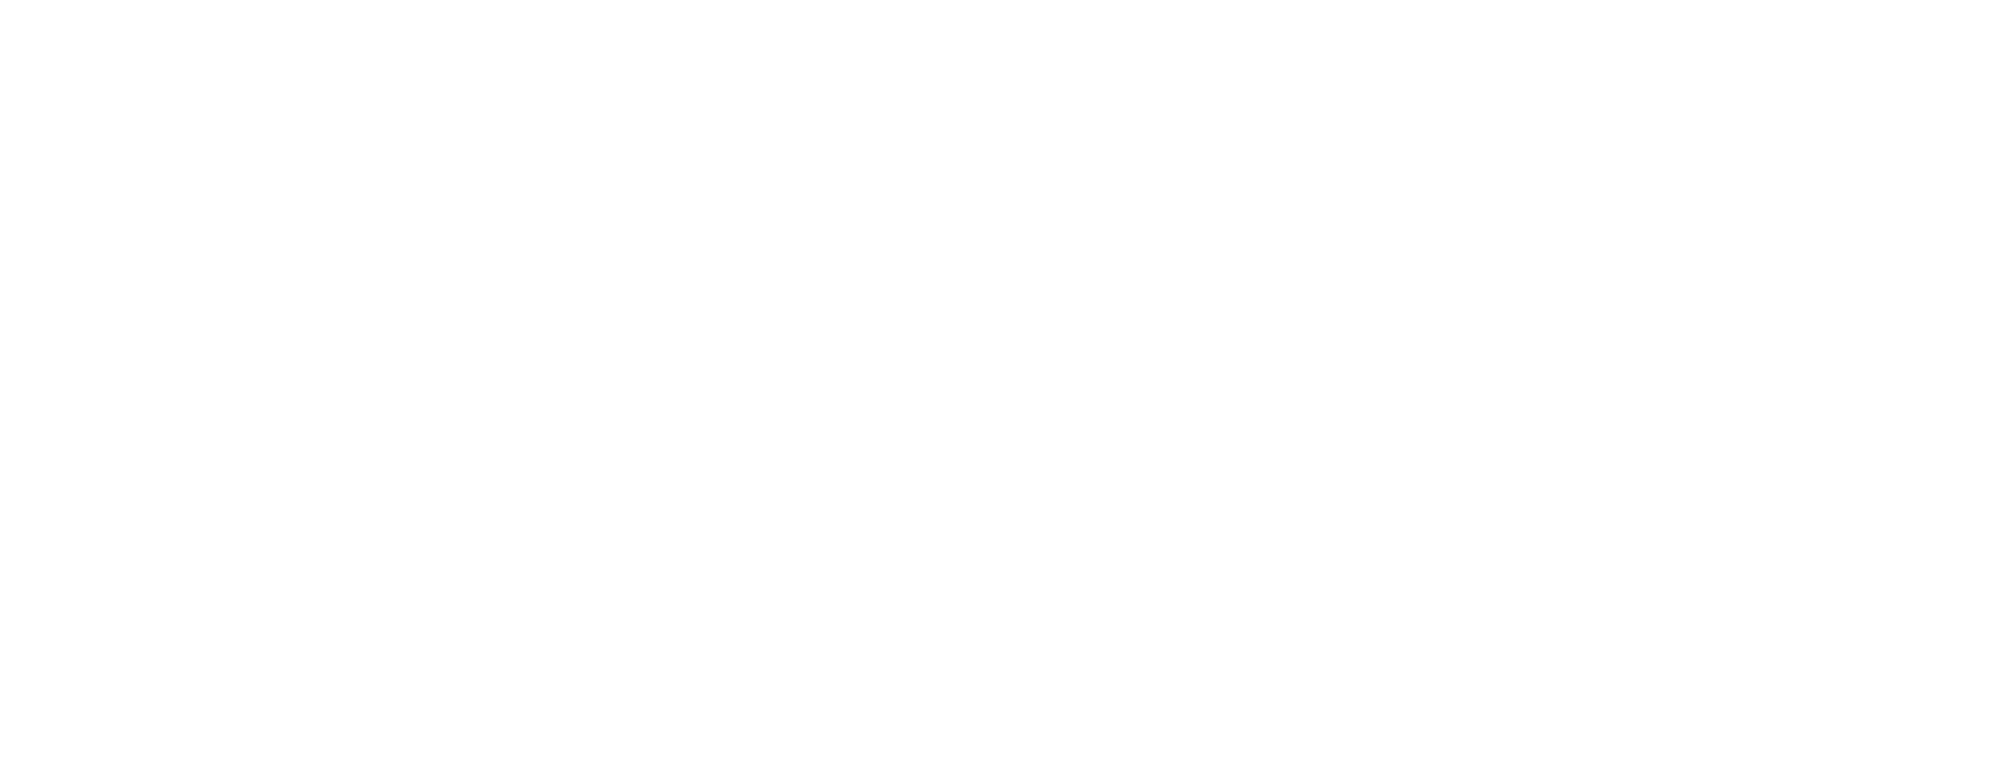 OpenFF Toolkit 0.13.0+0.g6a12d8a3.dirty documentation logo